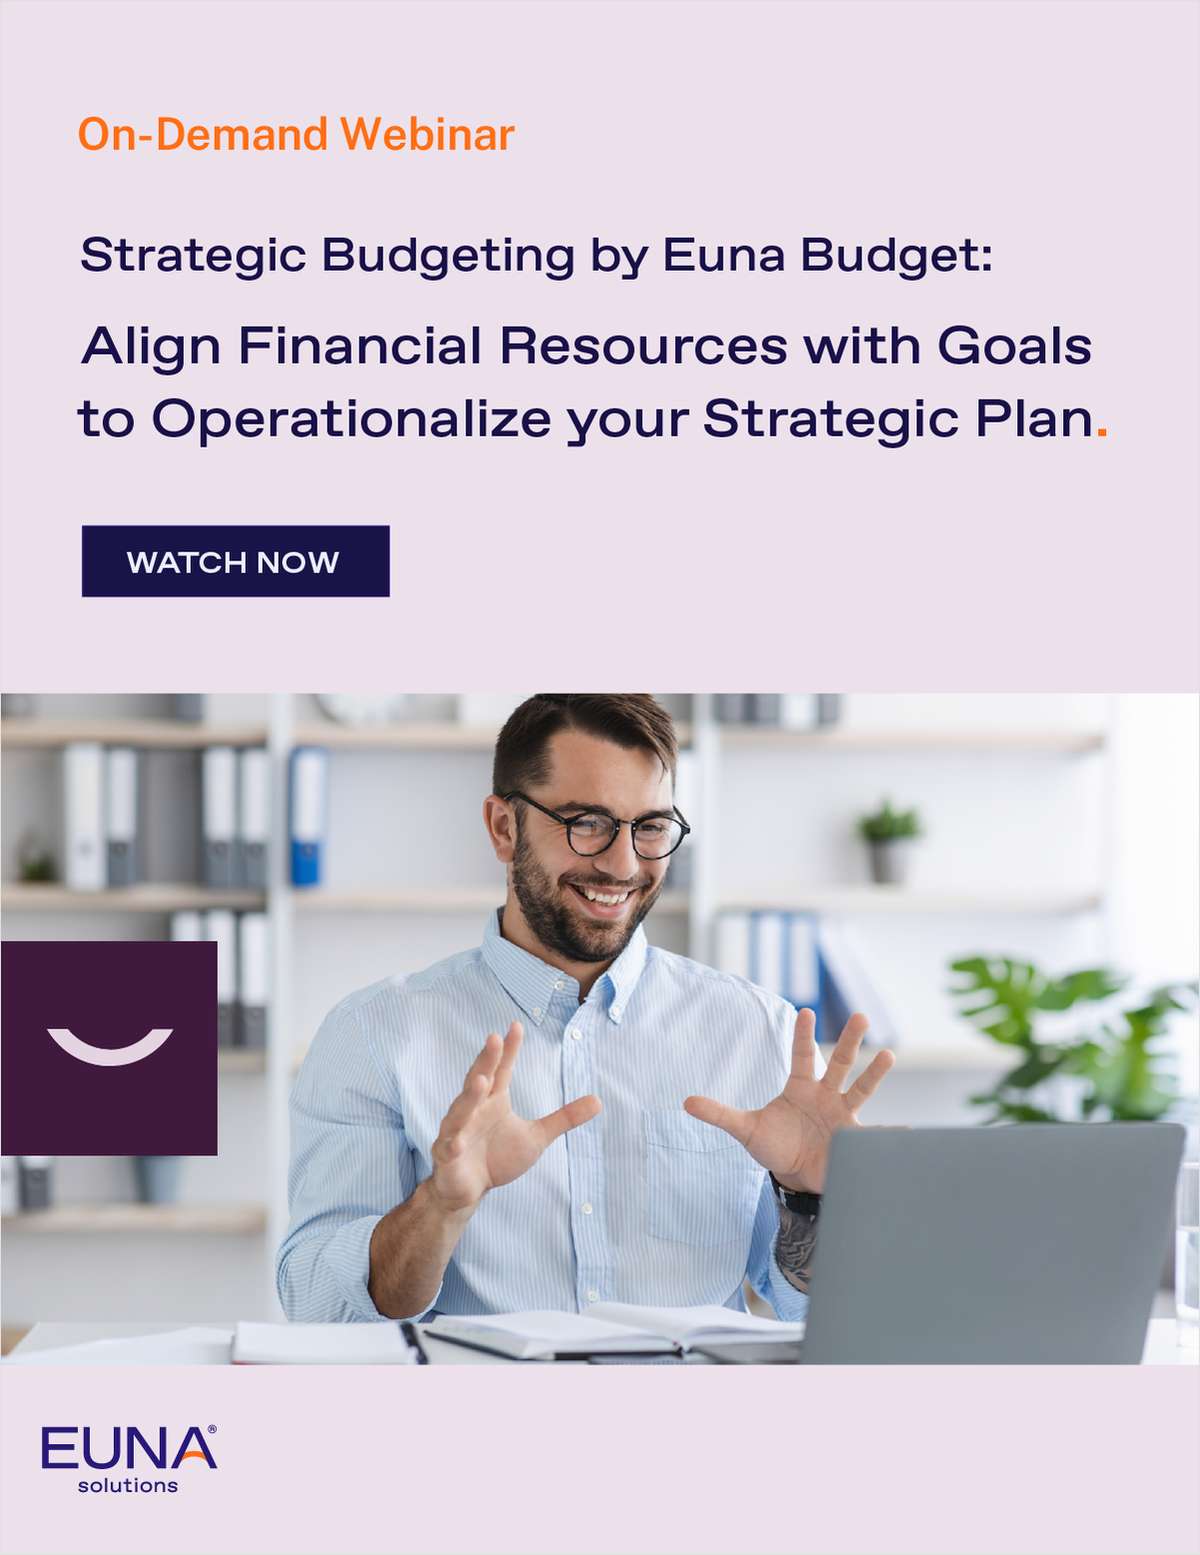 Strategic Budgeting by Euna Budget: Align Financial Resources with Goals to Operationalize your Strategic Plan